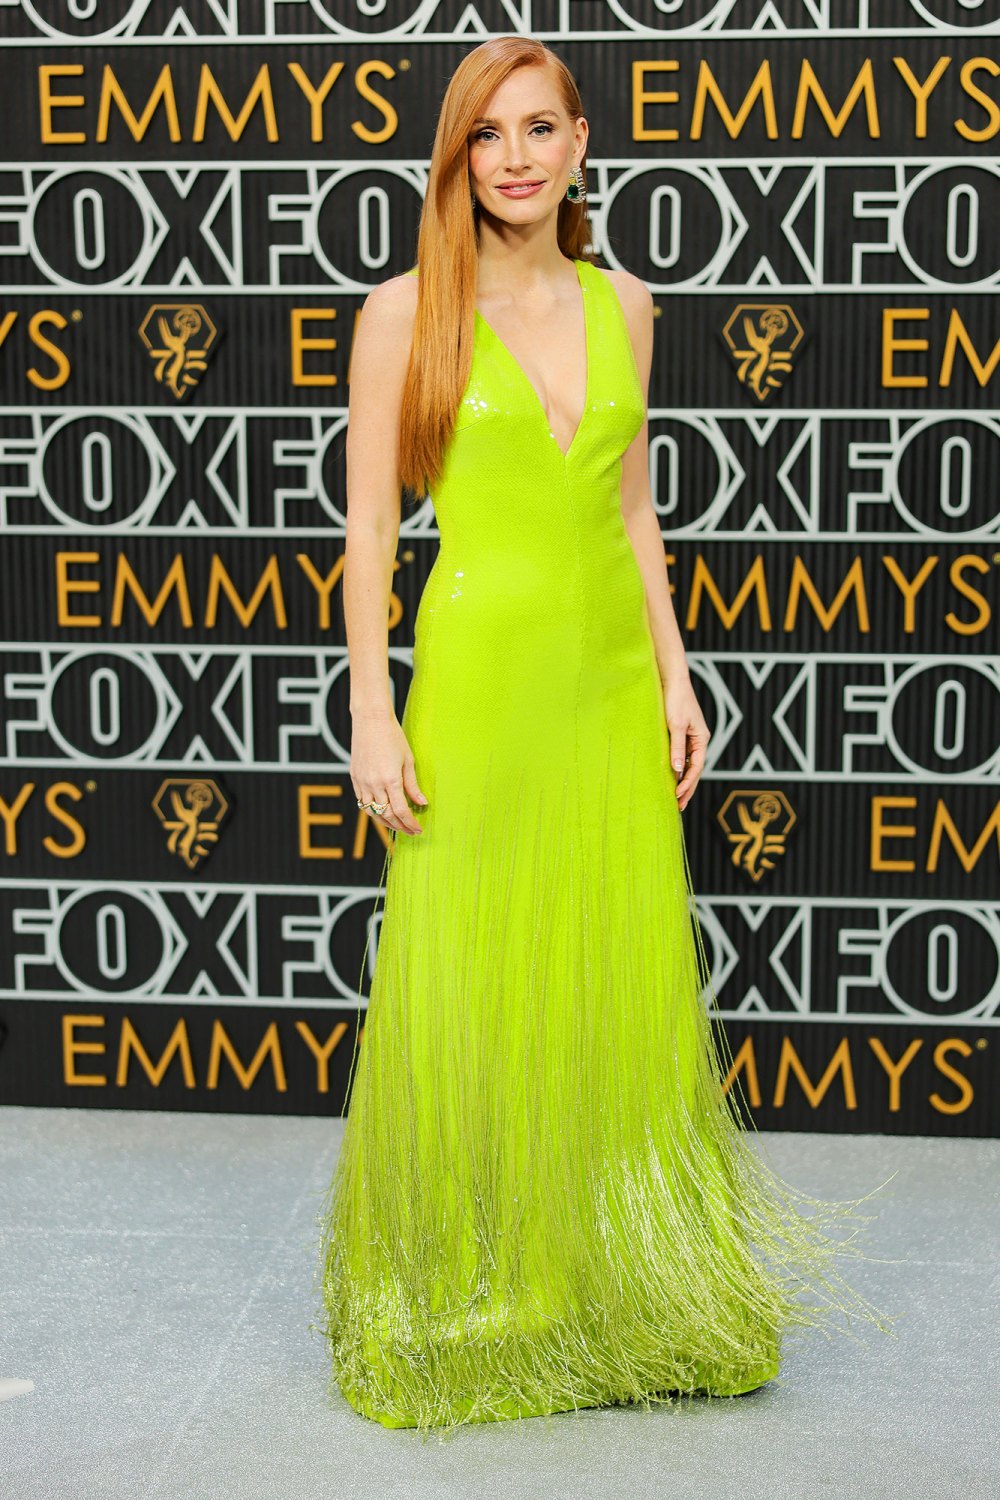 Feature Jessica Chastain Is Lovely in Lime Green Gown 2023 Emmys Red Carpet